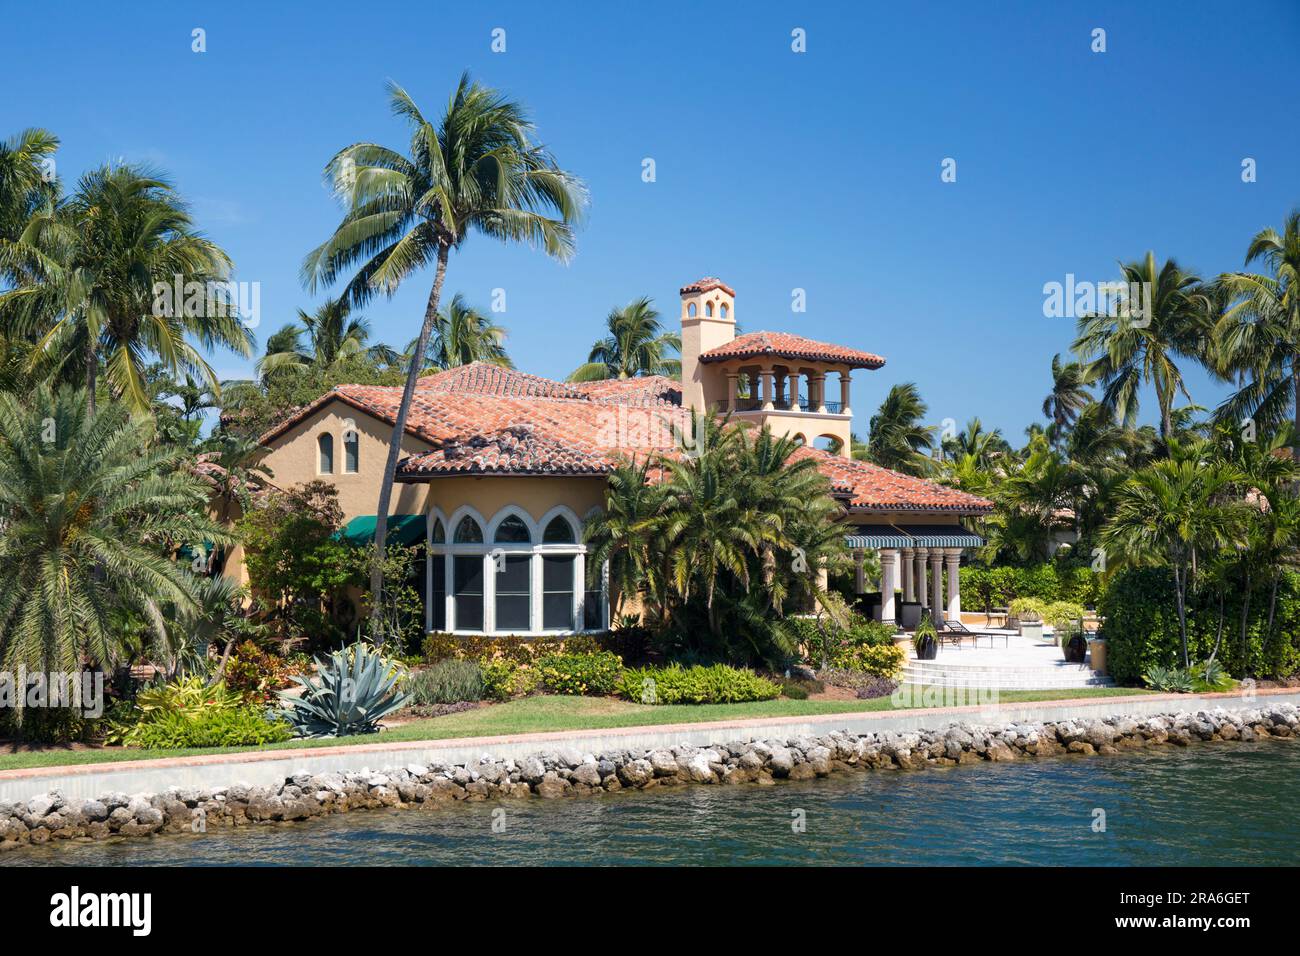 Fort Lauderdale, Florida, USA. Luxury waterfront mansion overlooking the New River in the Las Olas Isles district. Stock Photo